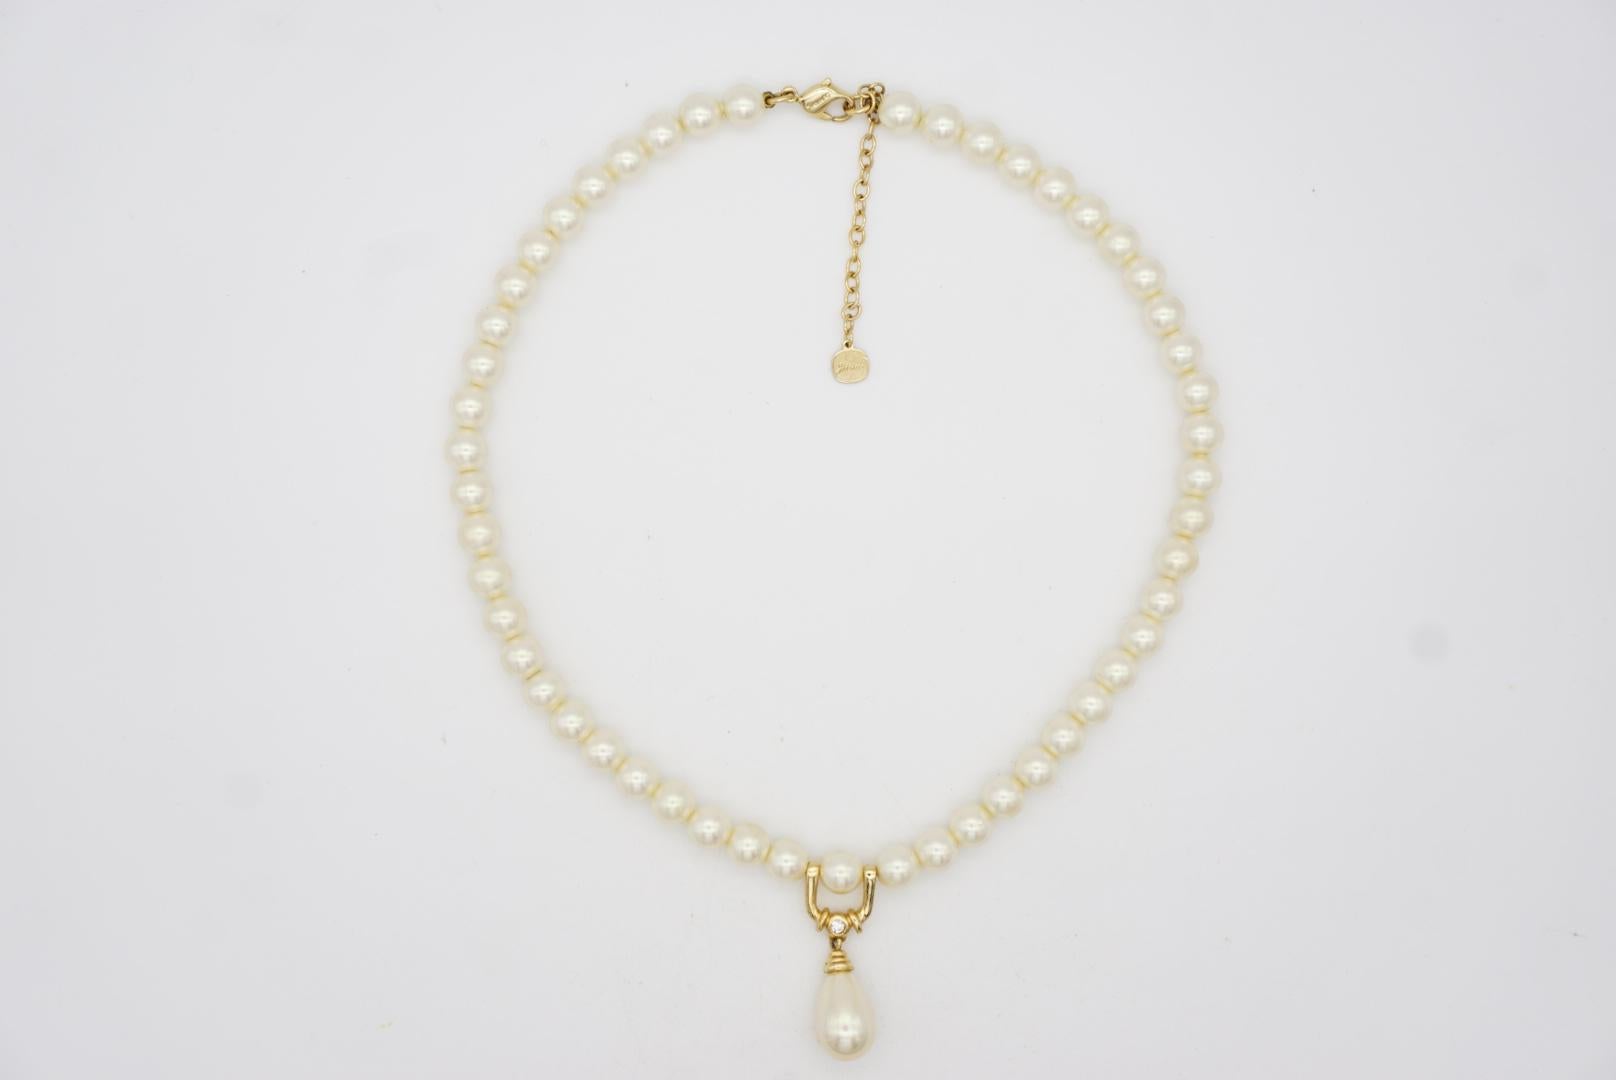 Christian Dior GROSSE 1960s White Pearls Water Drop Pendant Crystals Necklace For Sale 4